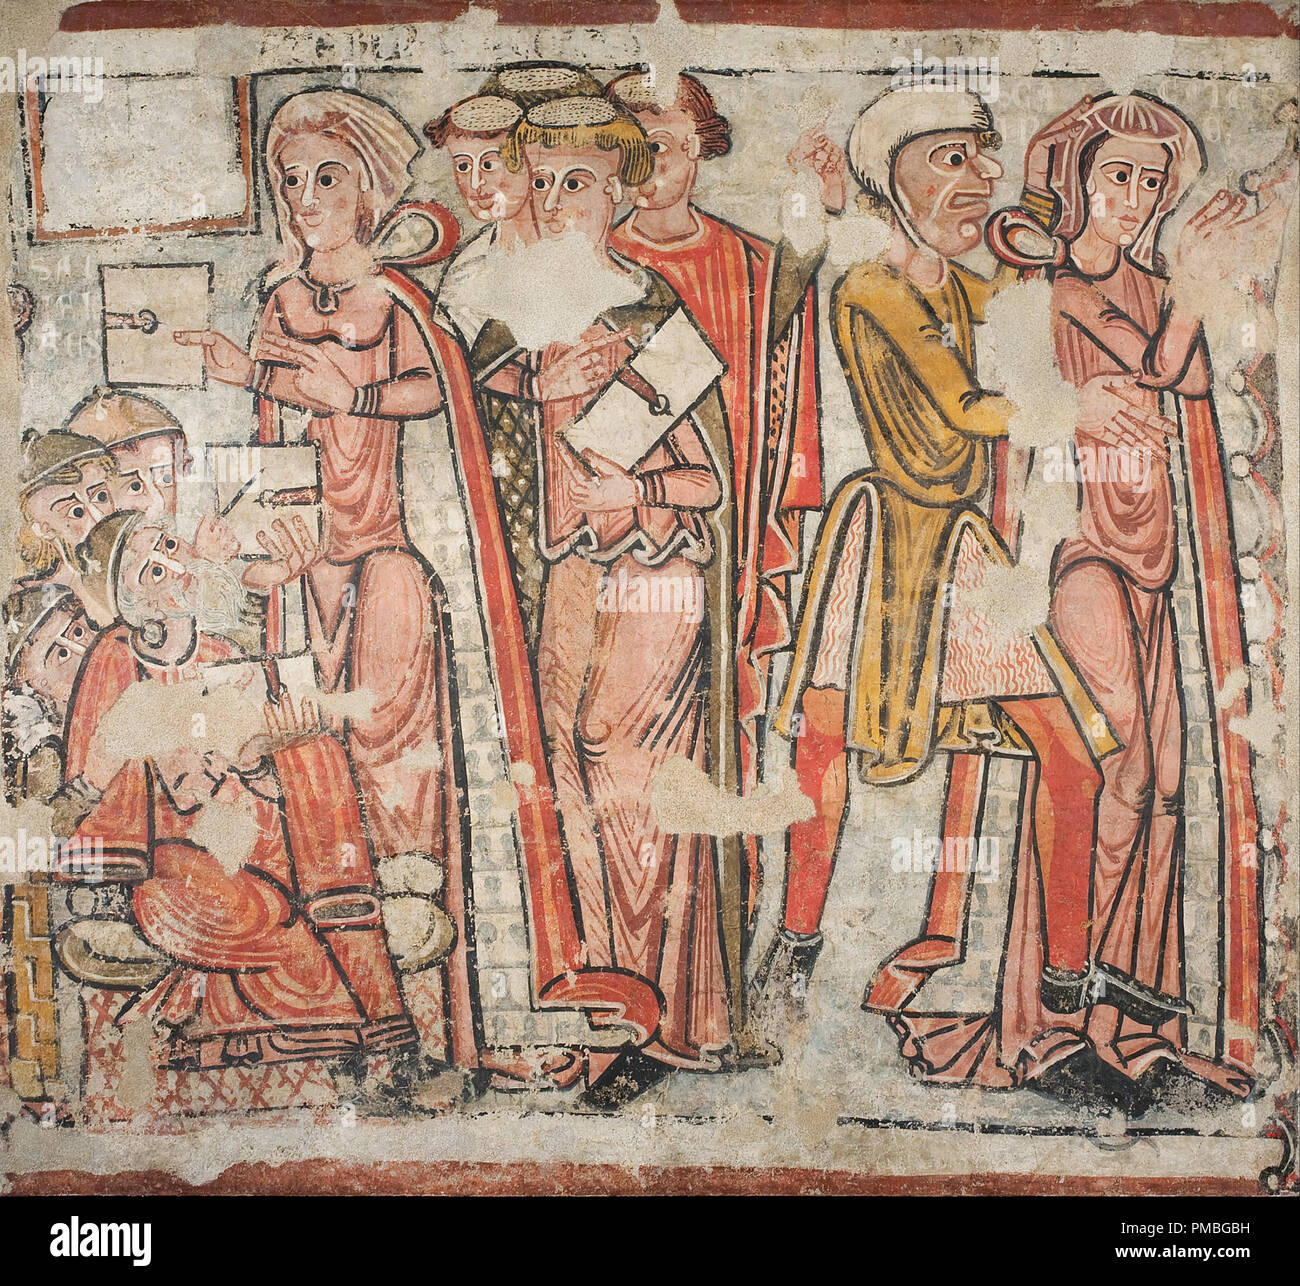 Dispute and Arrest of Saint Catherine. Date/Period: From 1241 until 1255. Mural painting. Mixed media. Height: 165,000 mm (180.44 yd); Width: 180,000 mm (196.85 yd). Author: UNKNOWN. Stock Photo